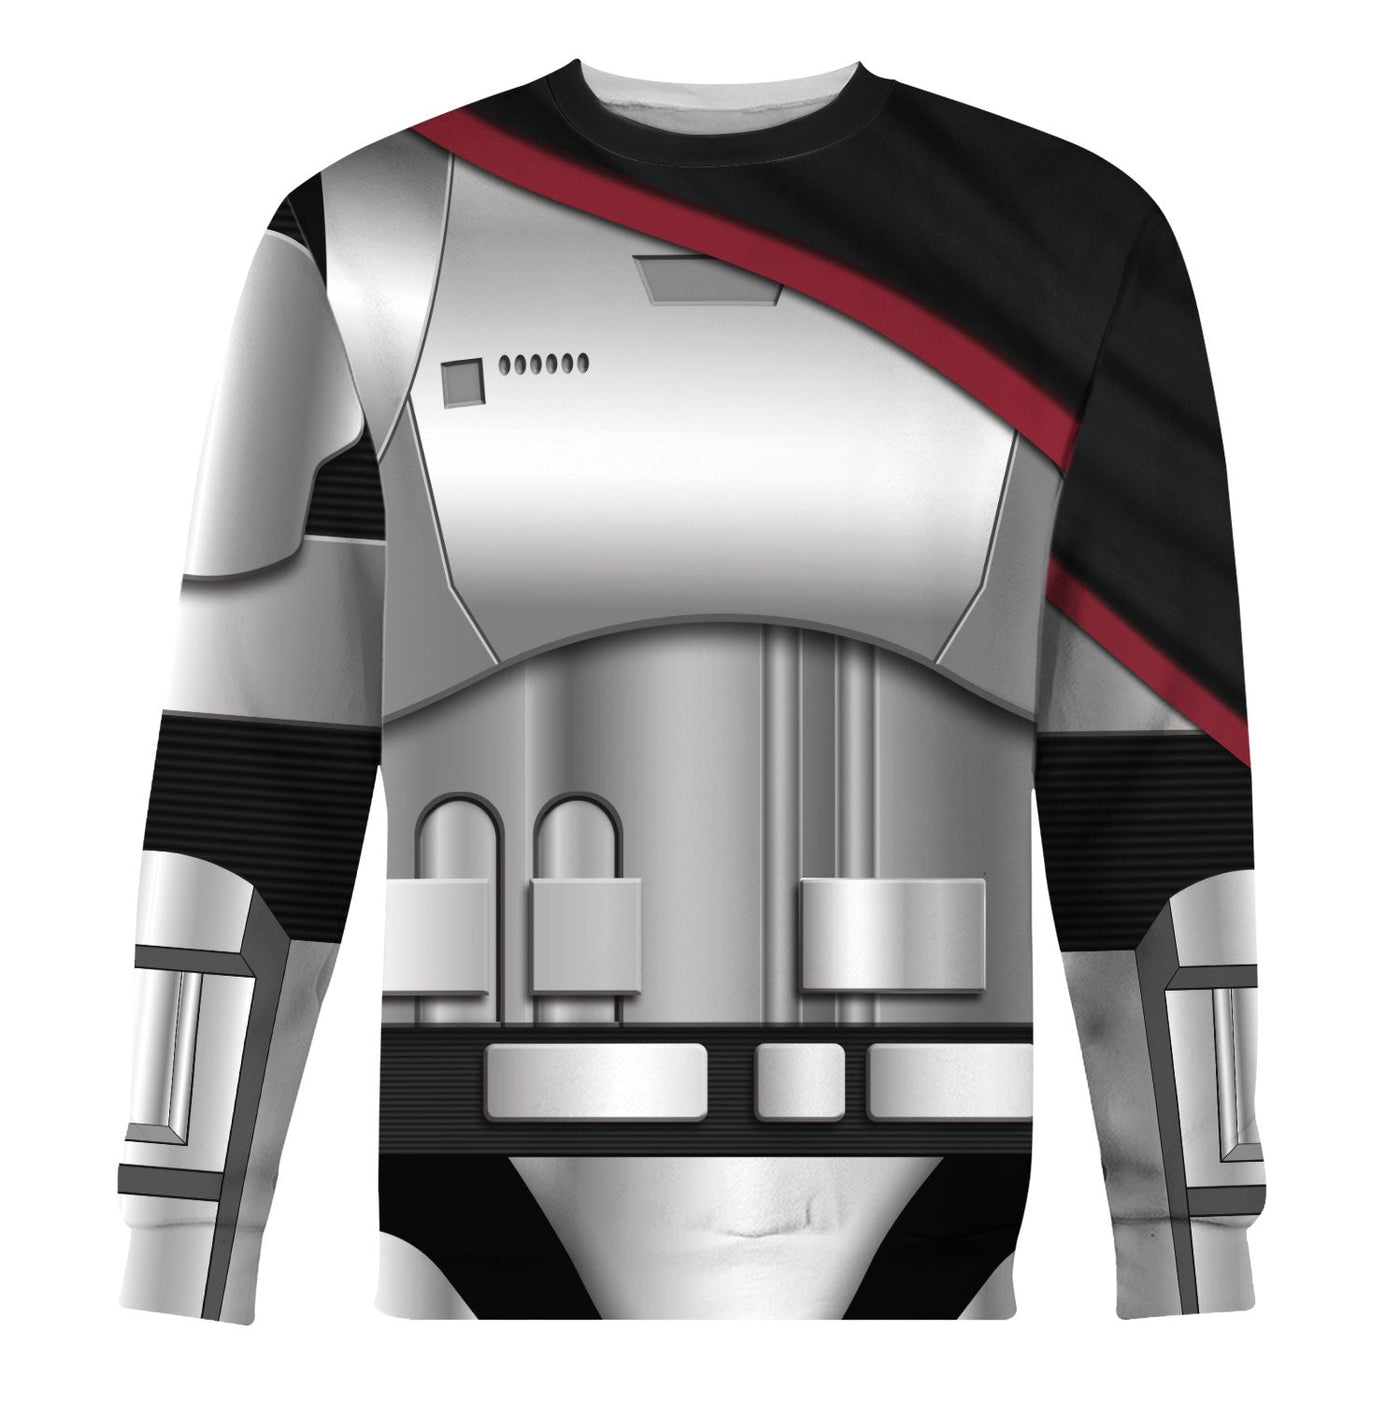 Star Wars Captain Phasma's Armor Costume - Sweater - Ugly Christmas Sweater